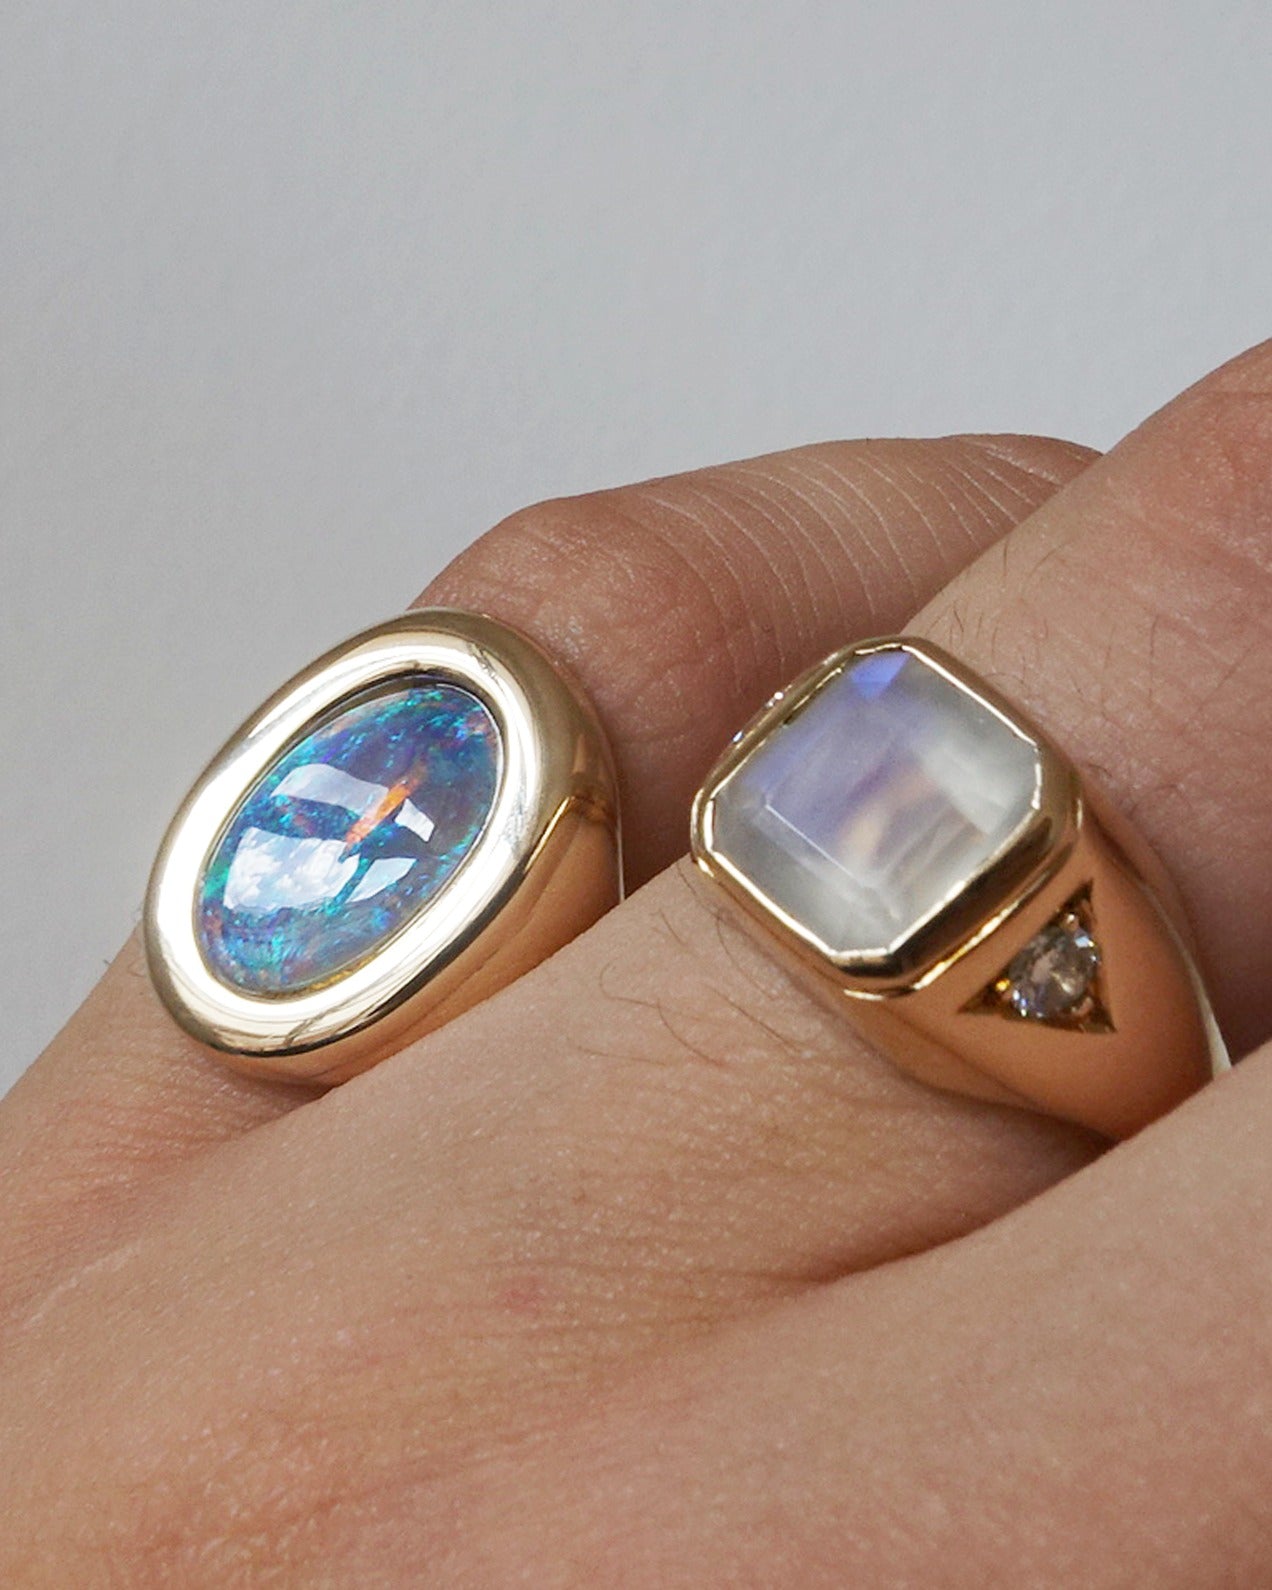 Oval ring with Australian blue opal